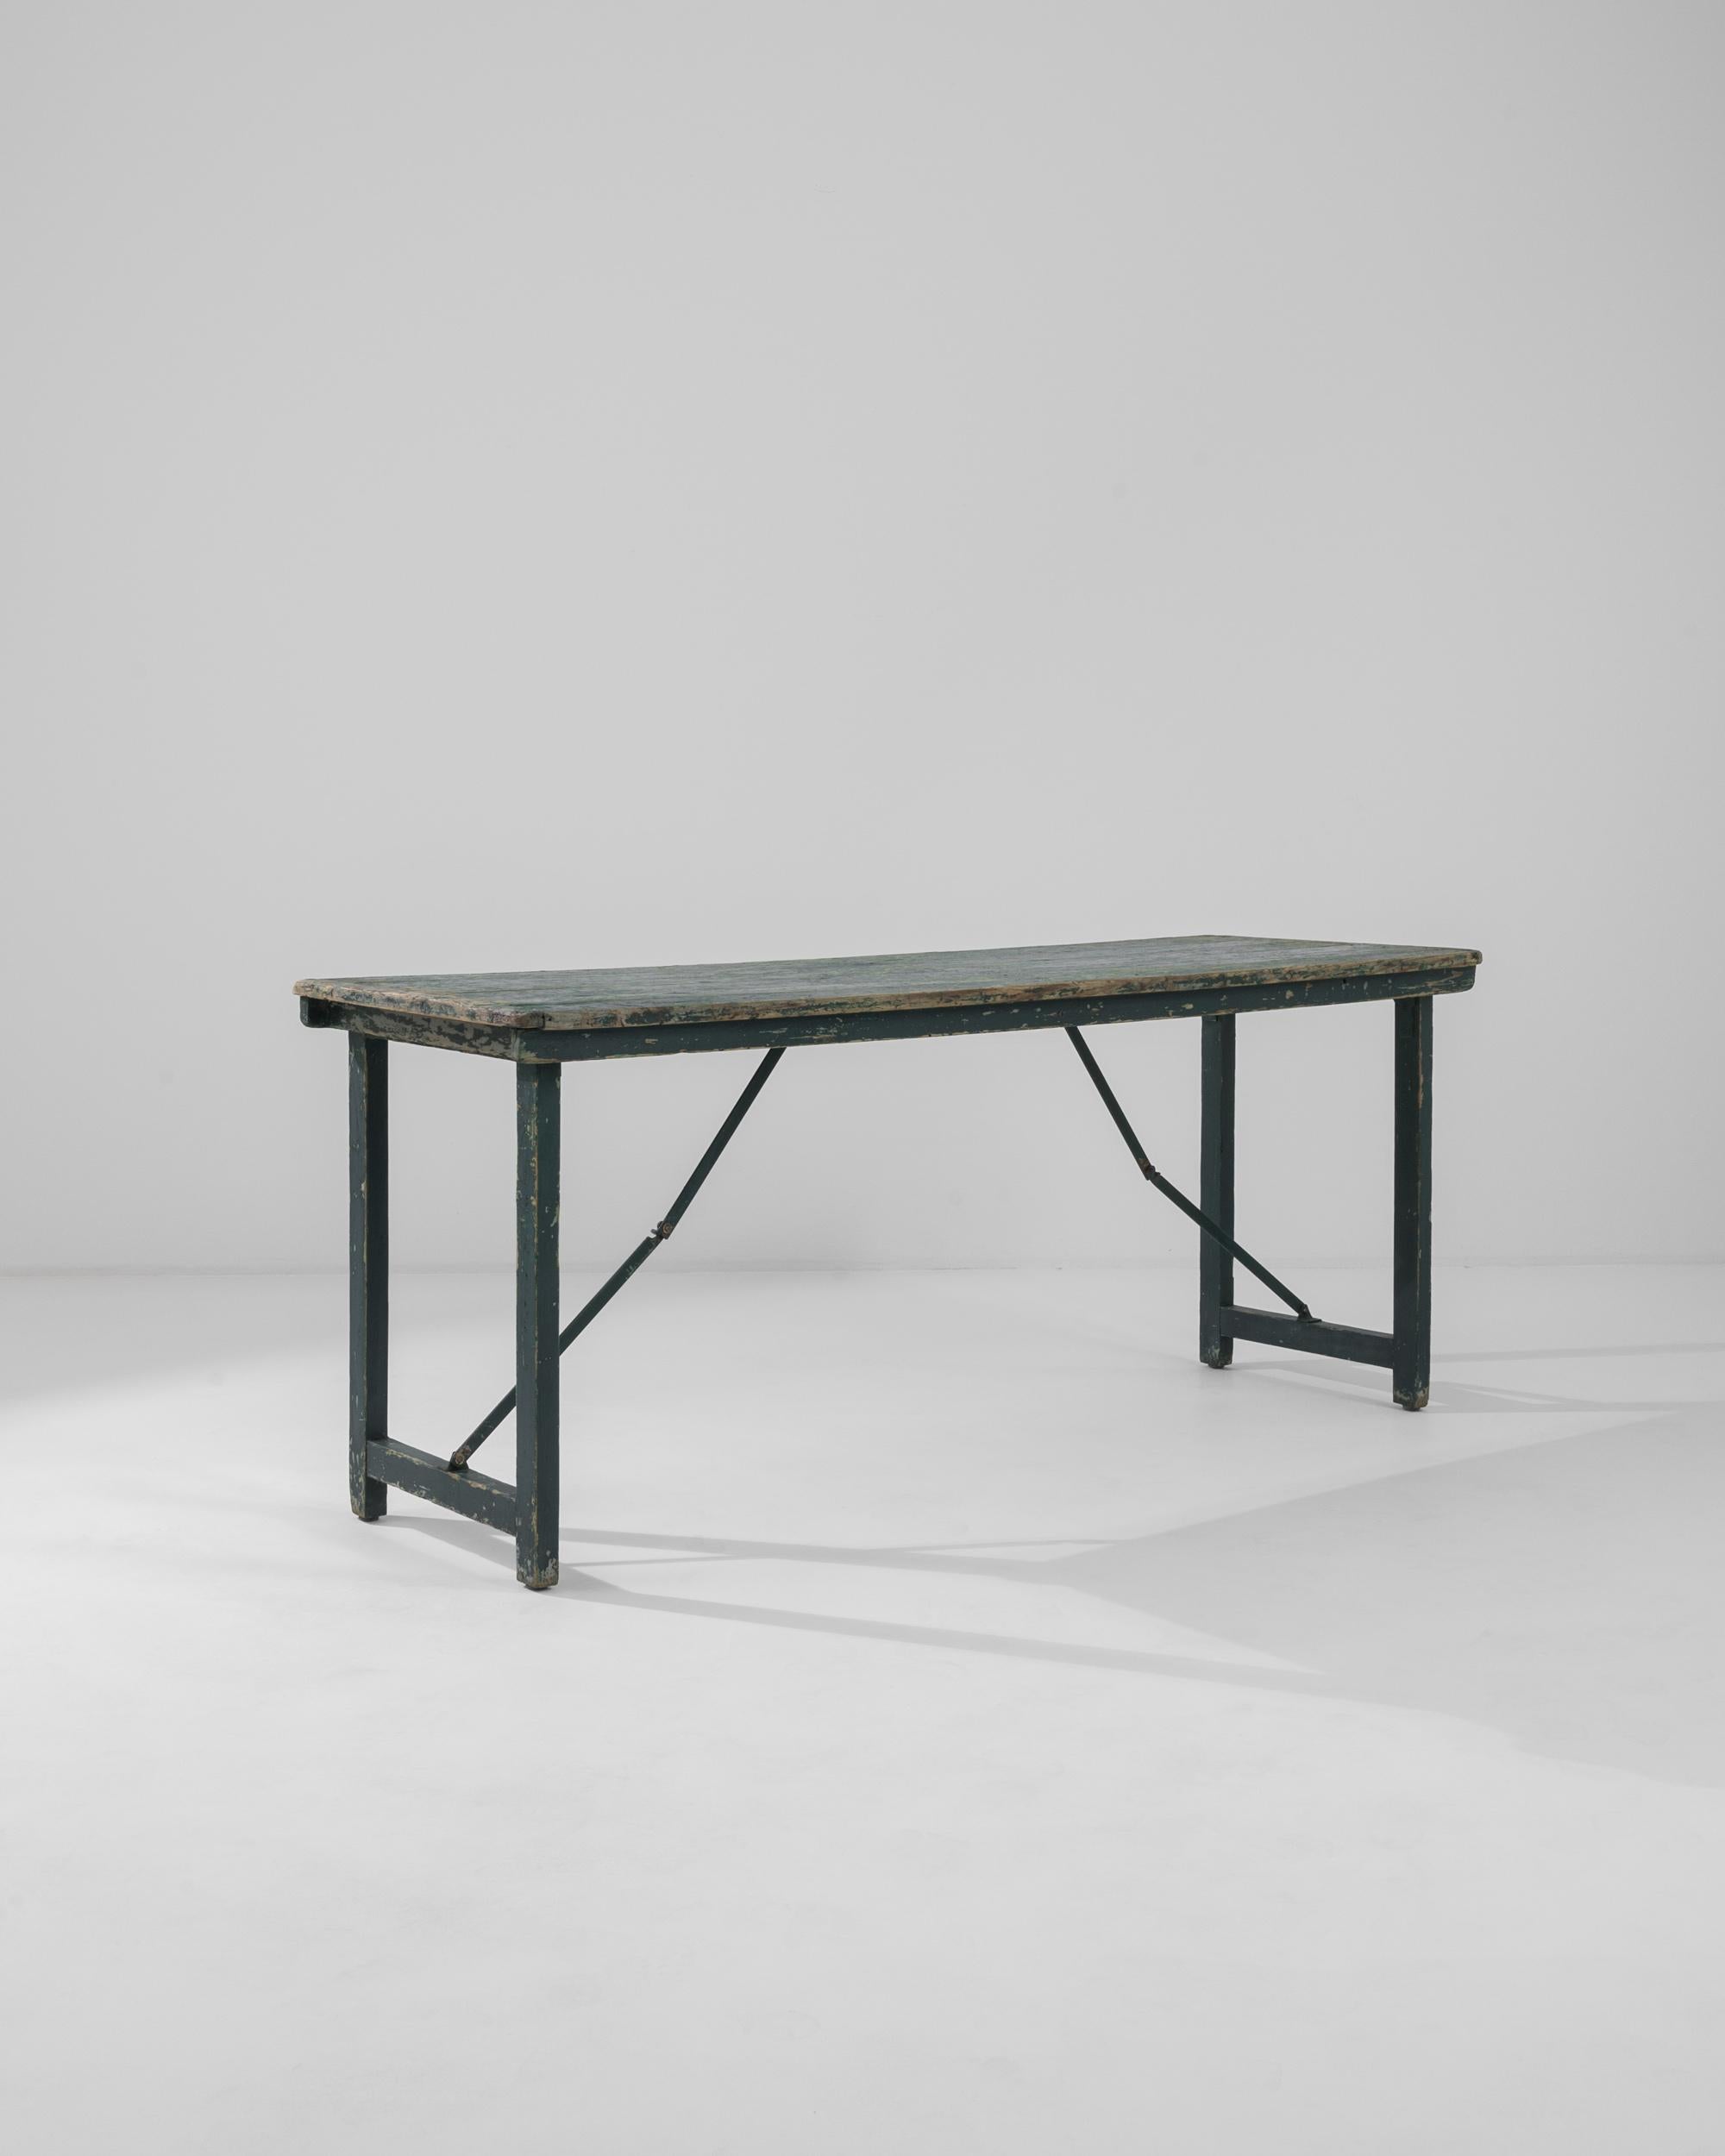 A 20th century wooden dining table produced in France, this lovely patinated folding table is a gem of simplicity and functionality. Exhibiting a rich palette of forest green with jade and teal hues, the heavily distressed patina gives the piece a